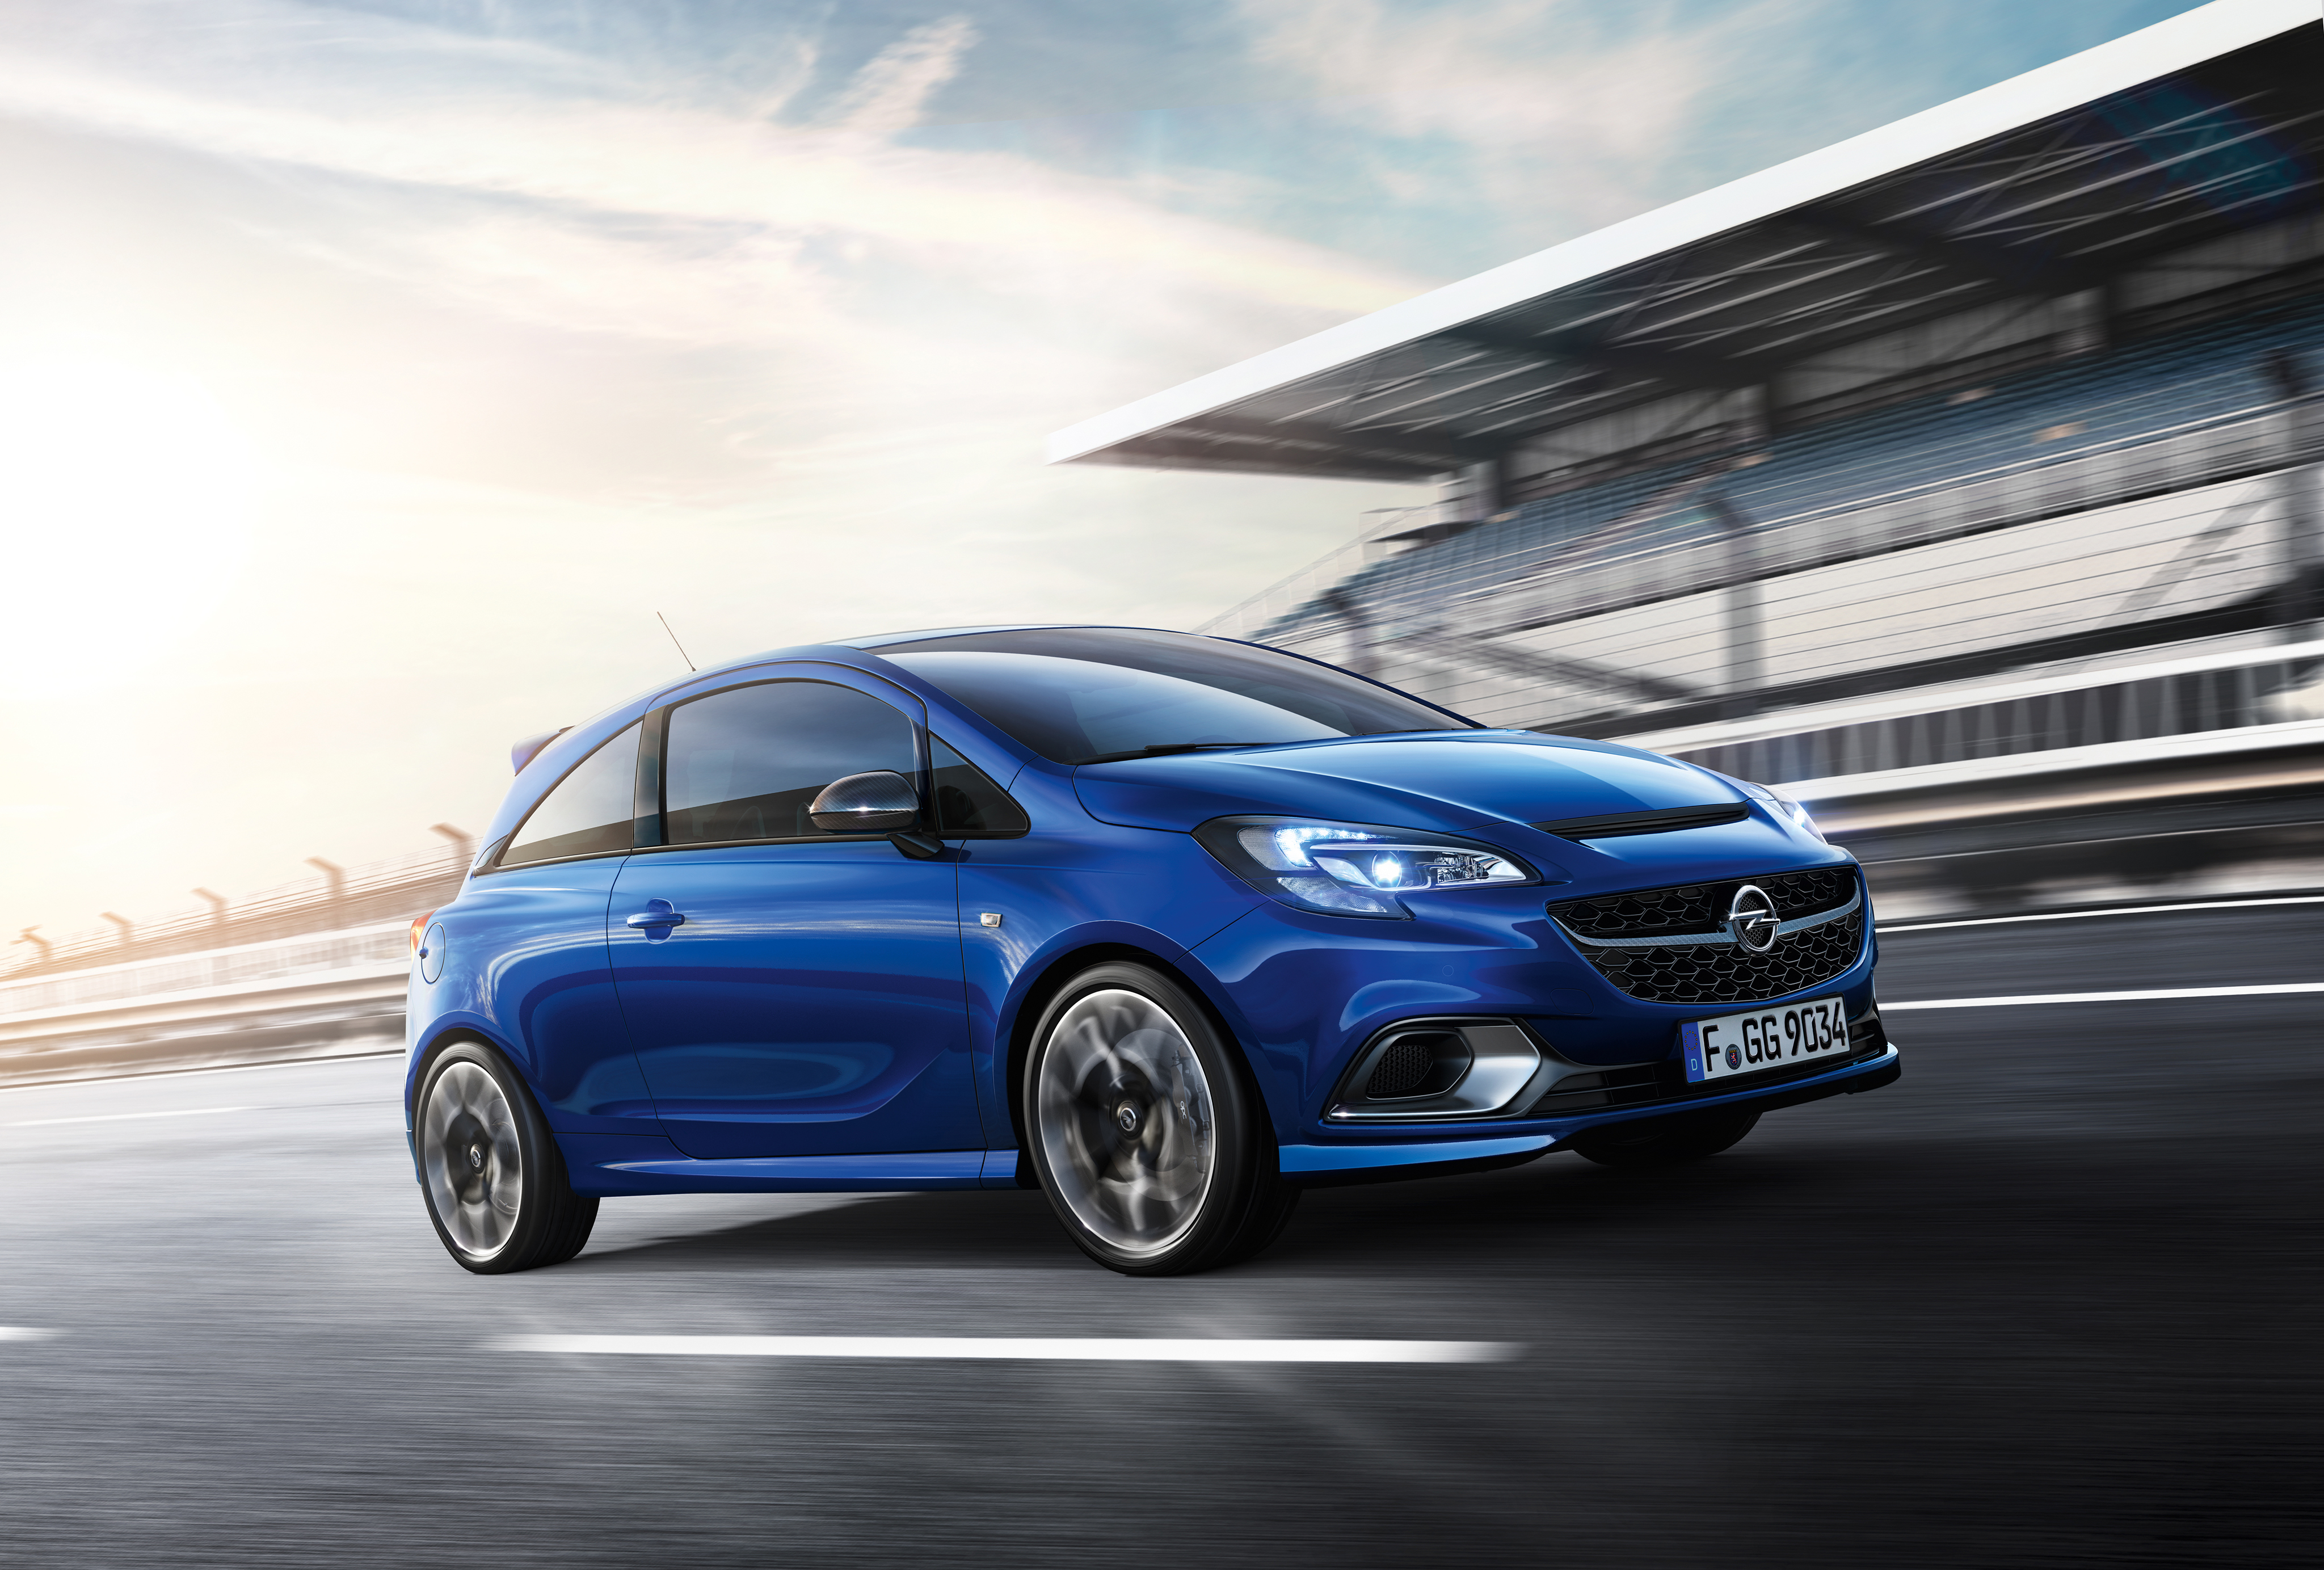 HD Opel Corsa Android Images